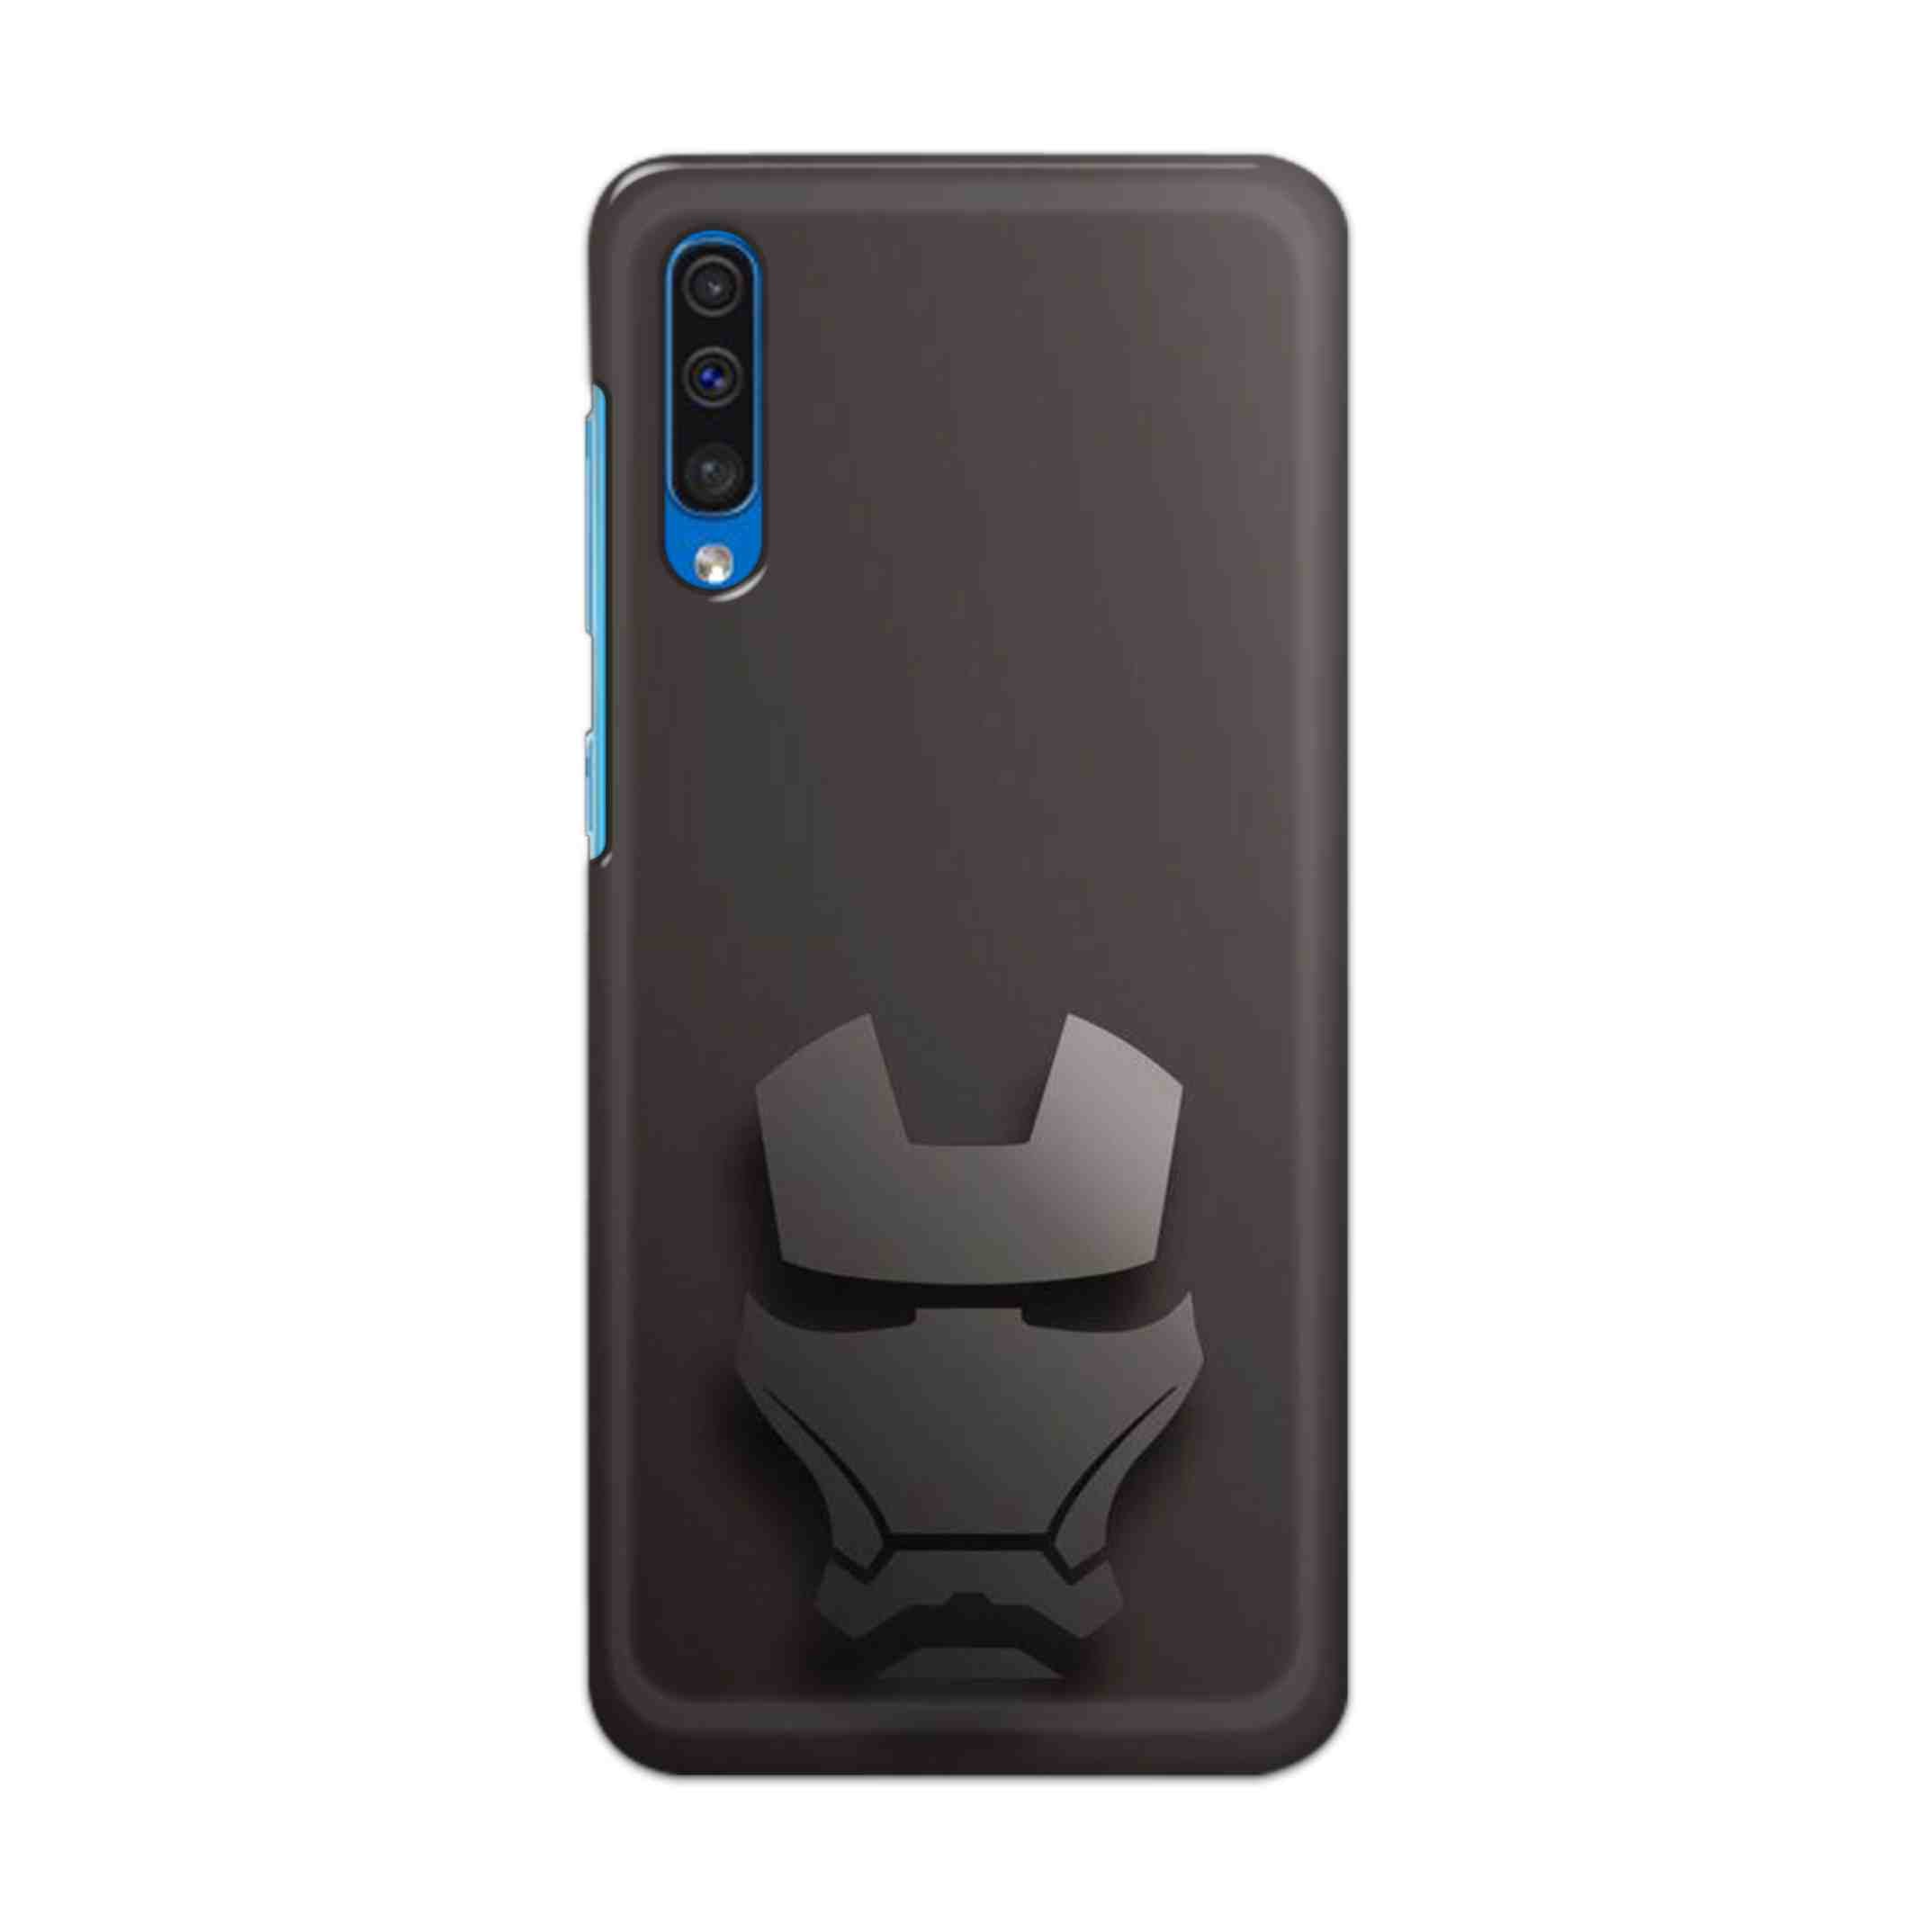 Buy Iron Man Logo Hard Back Mobile Phone Case Cover For Samsung Galaxy A50 / A50s / A30s Online